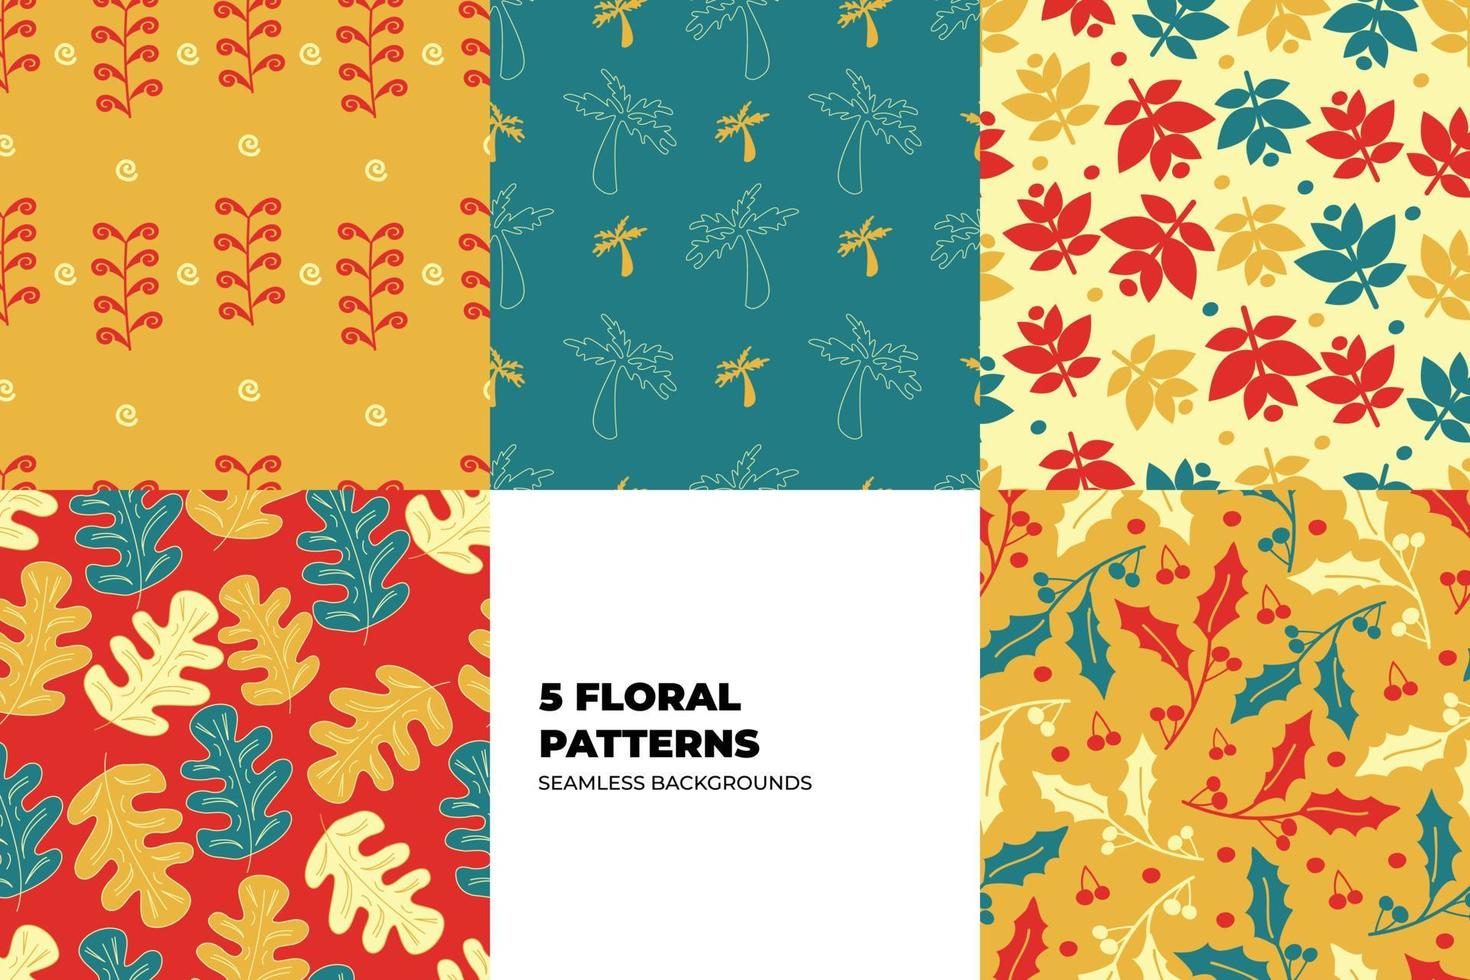 Floral seamless pattern set. Leaves and flowers in red and yellow tones. Repeating vector backgrounds for paper, cover, fabric, interior decor and textile users. Vector illustration.